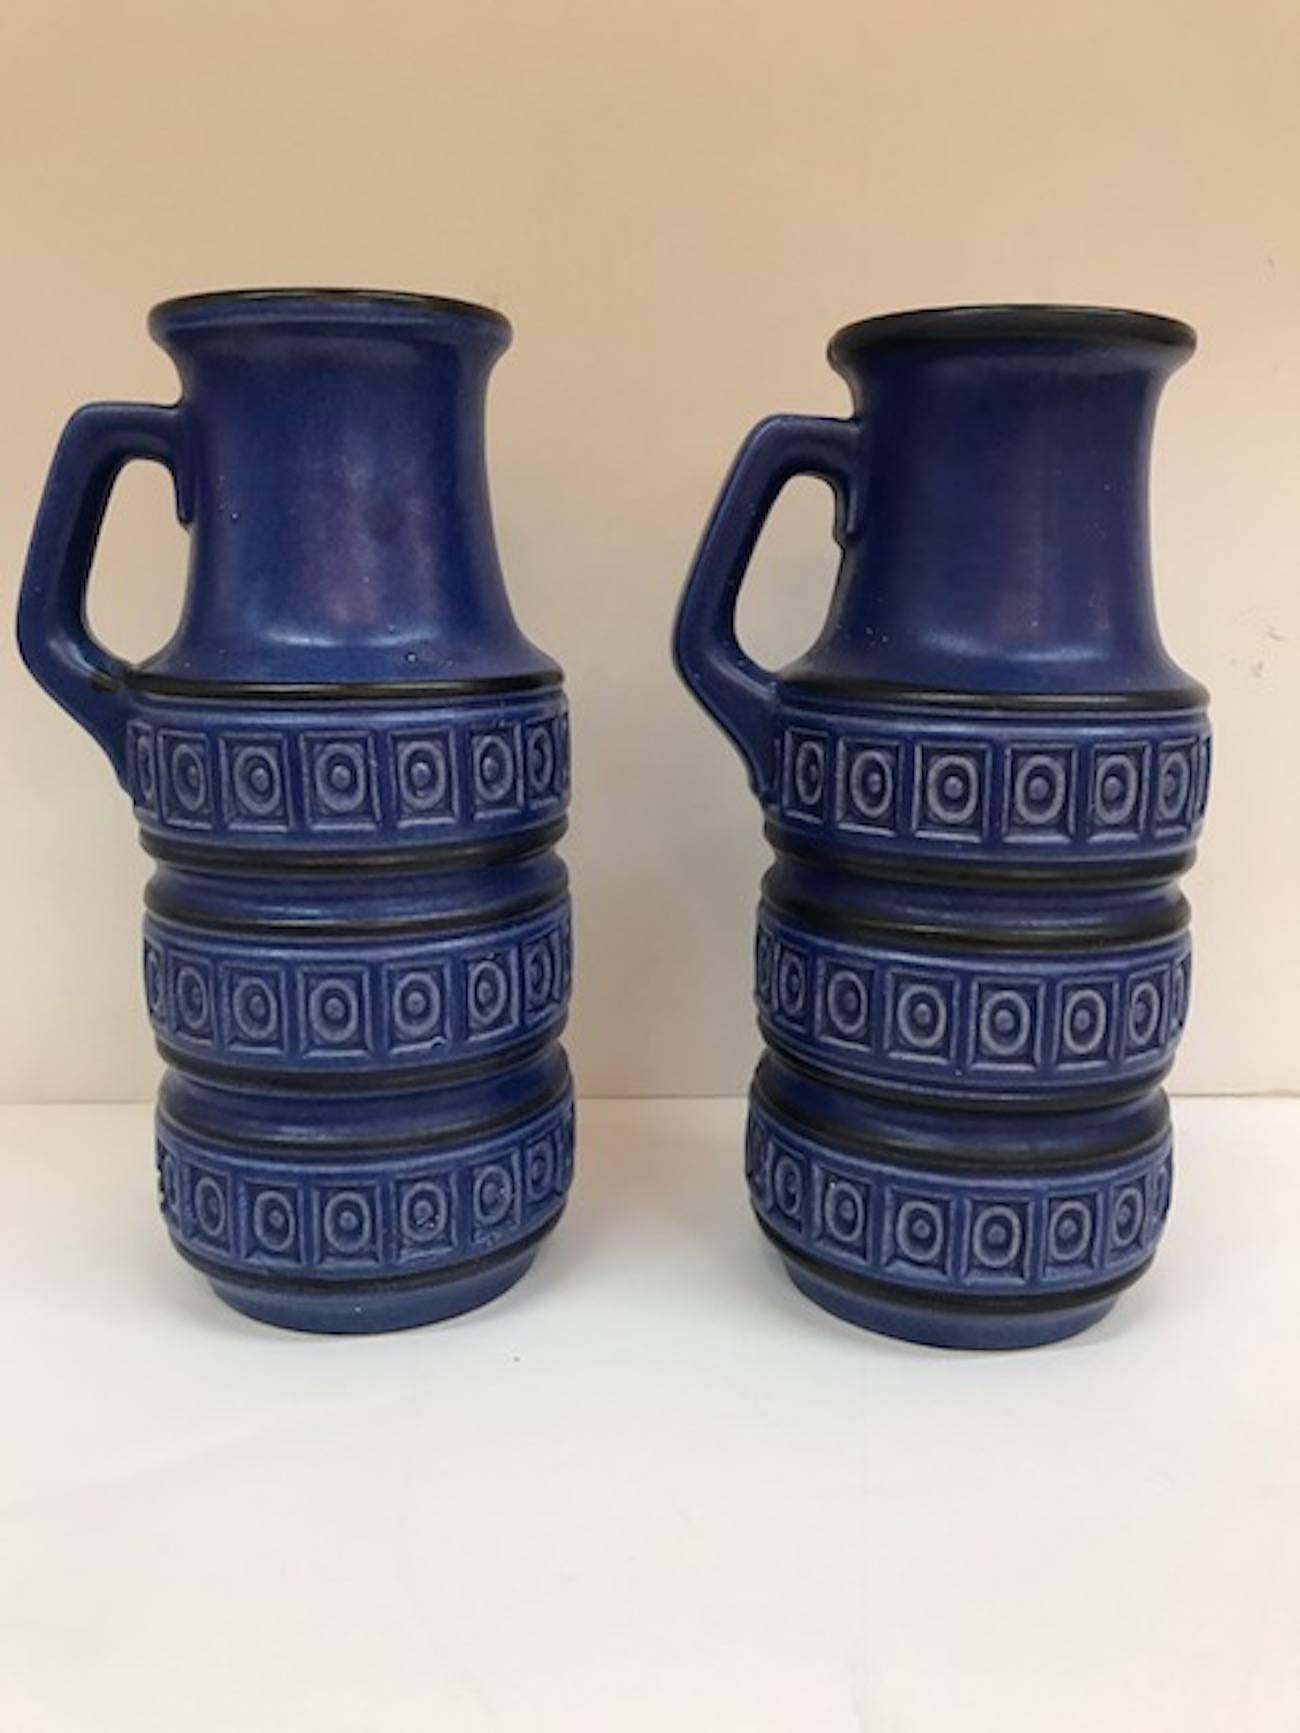 A lovely pair of matching matte finish indigo blue ceramic jug vases by prolific West German ceramic company Scheurich. Each jug 6 inches at the widest point including the handle, 4